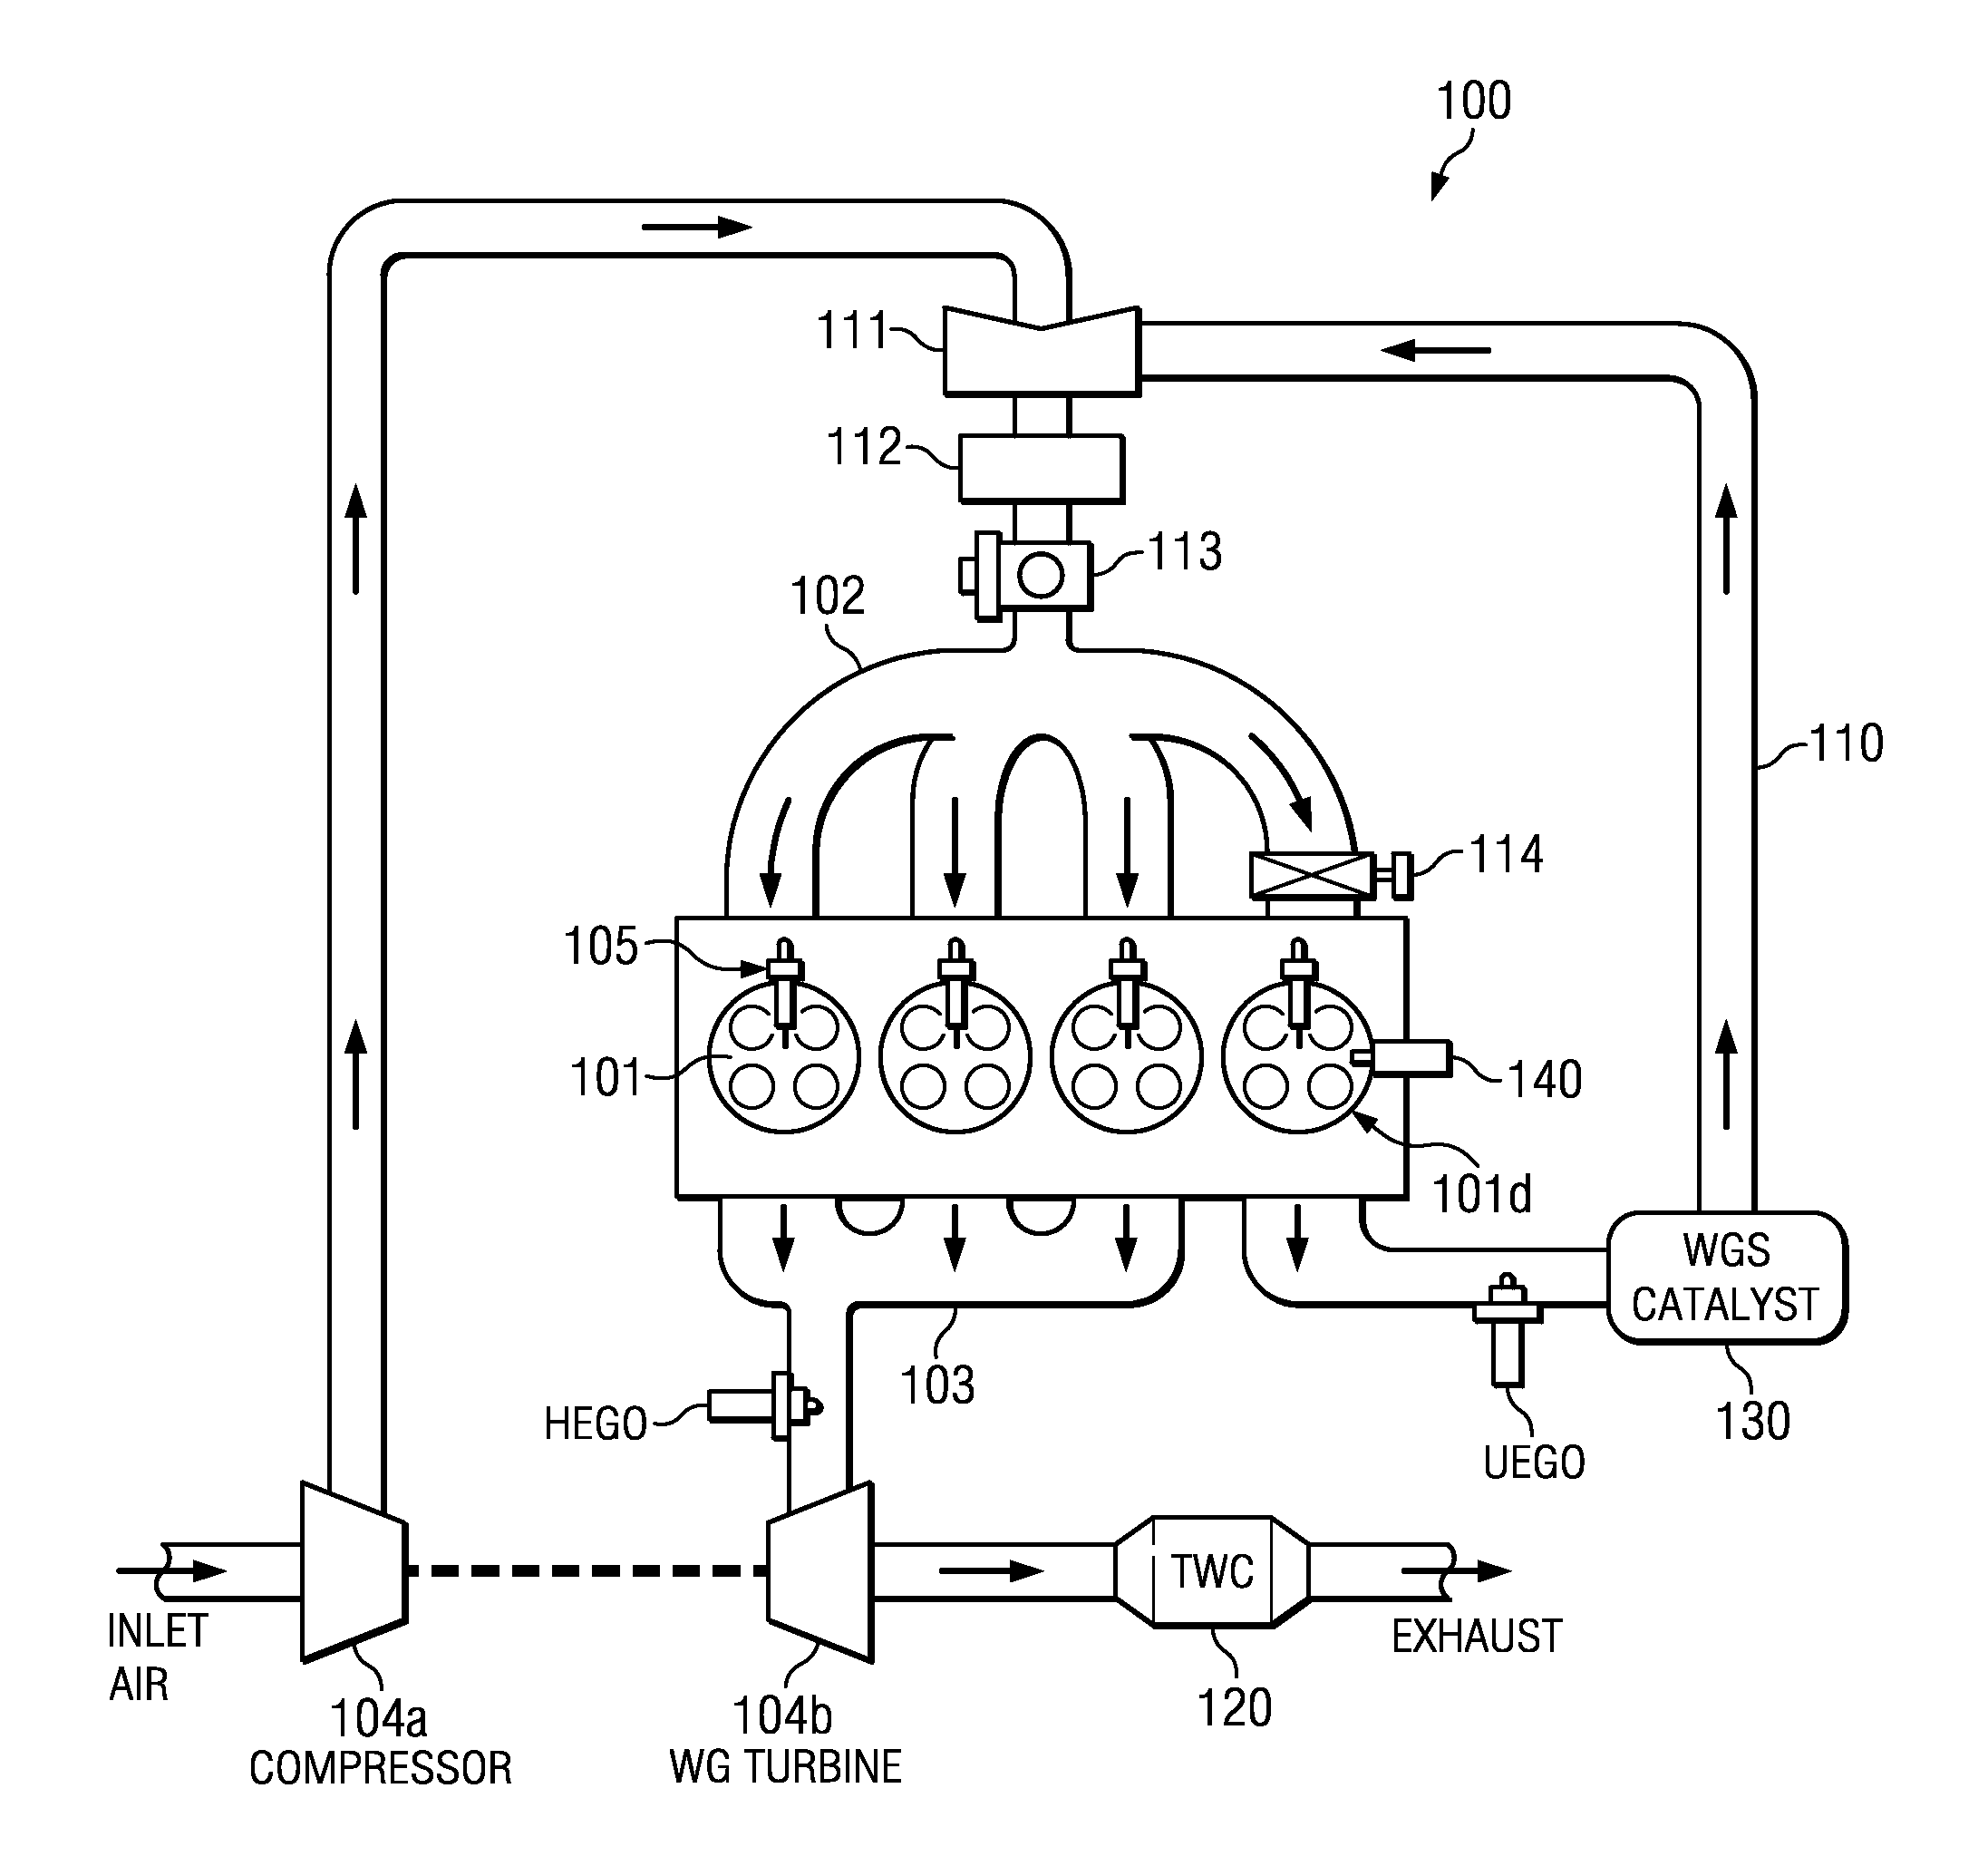 Fuel Injection Strategy for Internal Combustion Engine Having Dedicated EGR Cylinders